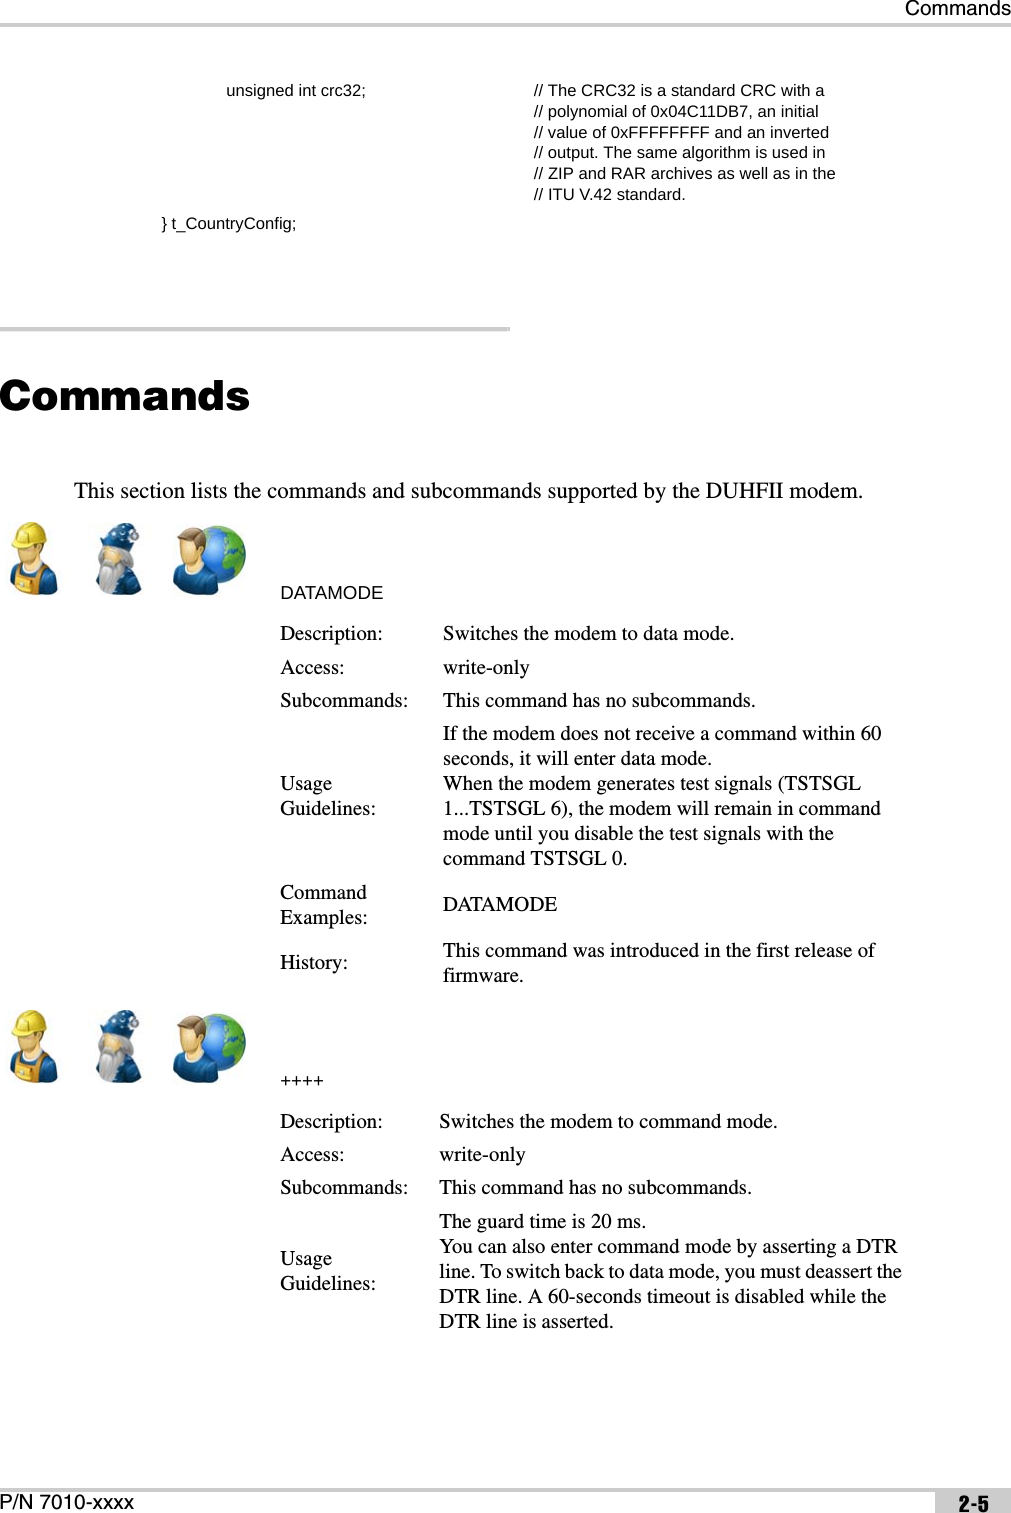 CommandsP/N 7010-xxxx 2-5CommandsThis section lists the commands and subcommands supported by the DUHFII modem.DATAMODE++++              unsigned int crc32; // The CRC32 is a standard CRC with a// polynomial of 0x04C11DB7, an initial// value of 0xFFFFFFFF and an inverted// output. The same algorithm is used in// ZIP and RAR archives as well as in the// ITU V.42 standard.} t_CountryConfig;Description: Switches the modem to data mode.Access: write-onlySubcommands: This command has no subcommands.Usage Guidelines:If the modem does not receive a command within 60 seconds, it will enter data mode. When the modem generates test signals (TSTSGL 1...TSTSGL 6), the modem will remain in command mode until you disable the test signals with the command TSTSGL 0.Command Examples: DATAMODEHistory: This command was introduced in the first release of firmware.Description: Switches the modem to command mode.Access: write-onlySubcommands: This command has no subcommands.Usage Guidelines:The guard time is 20 ms.You can also enter command mode by asserting a DTR line. To switch back to data mode, you must deassert the DTR line. A 60-seconds timeout is disabled while the DTR line is asserted.